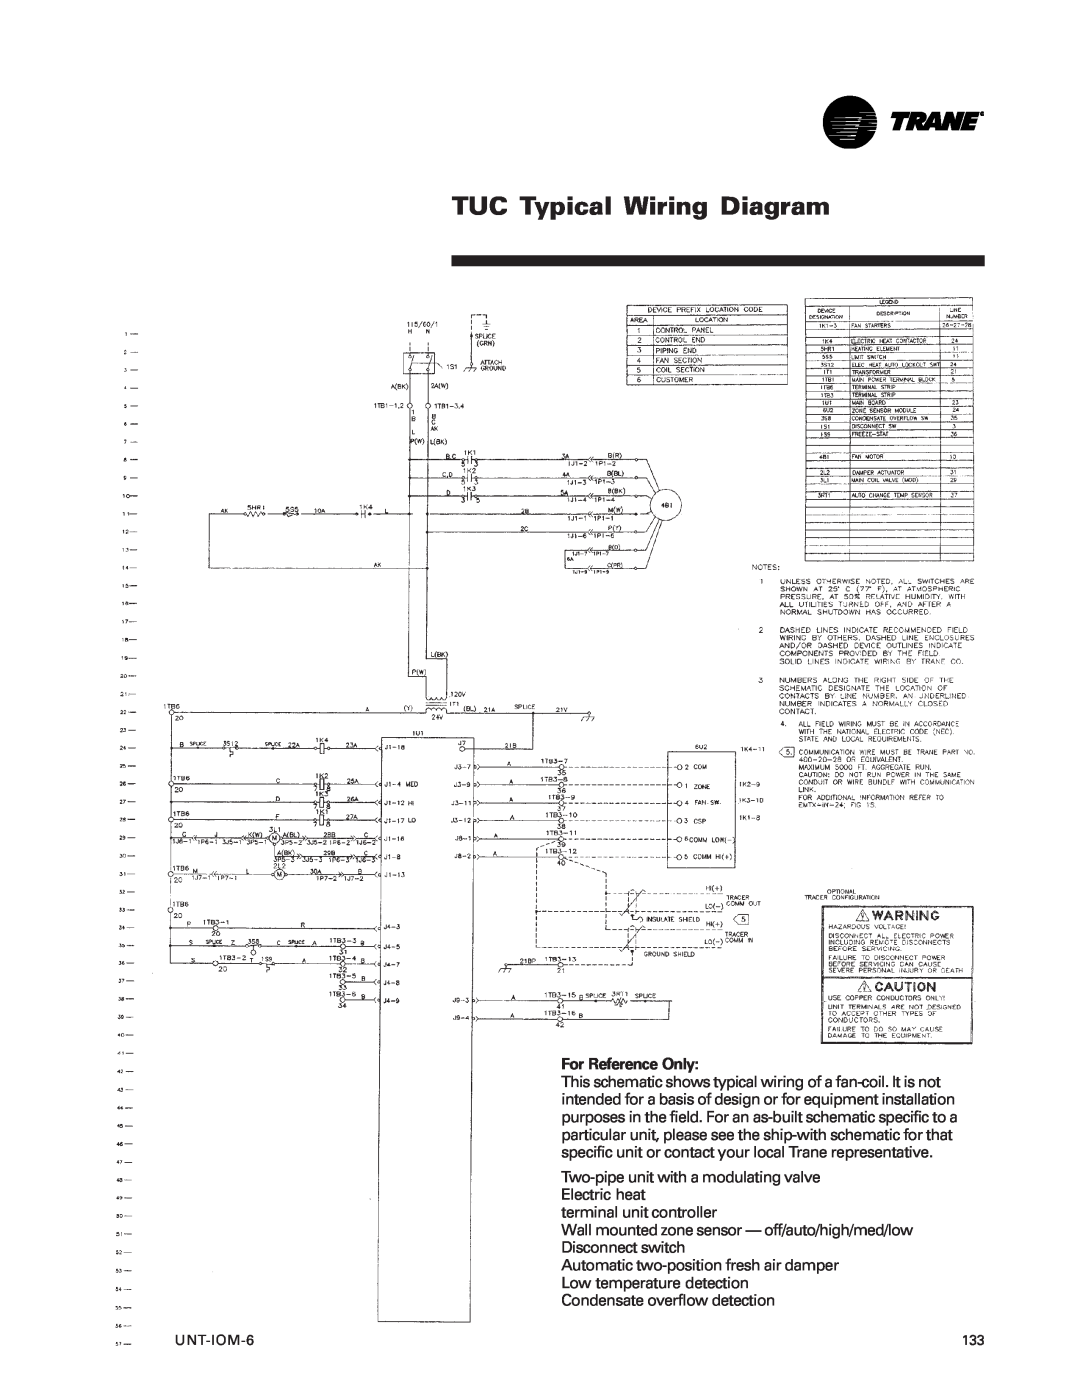 Trane LO manual TUC Typical Wiring Diagram, For Reference Only 